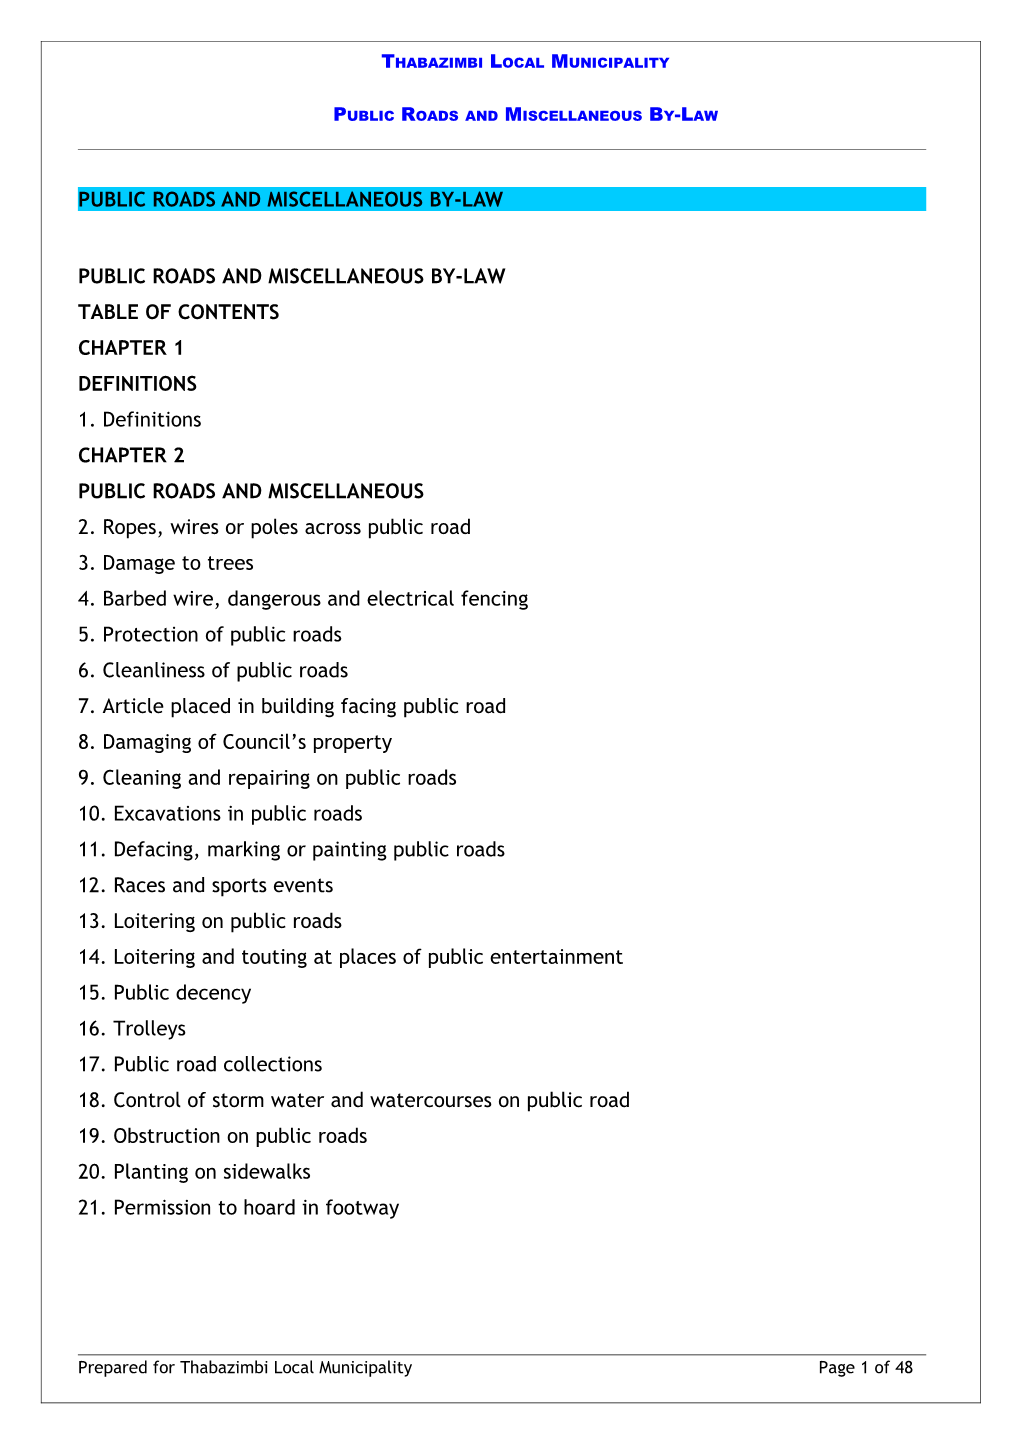 Public Roads and Miscellaneous By-Law